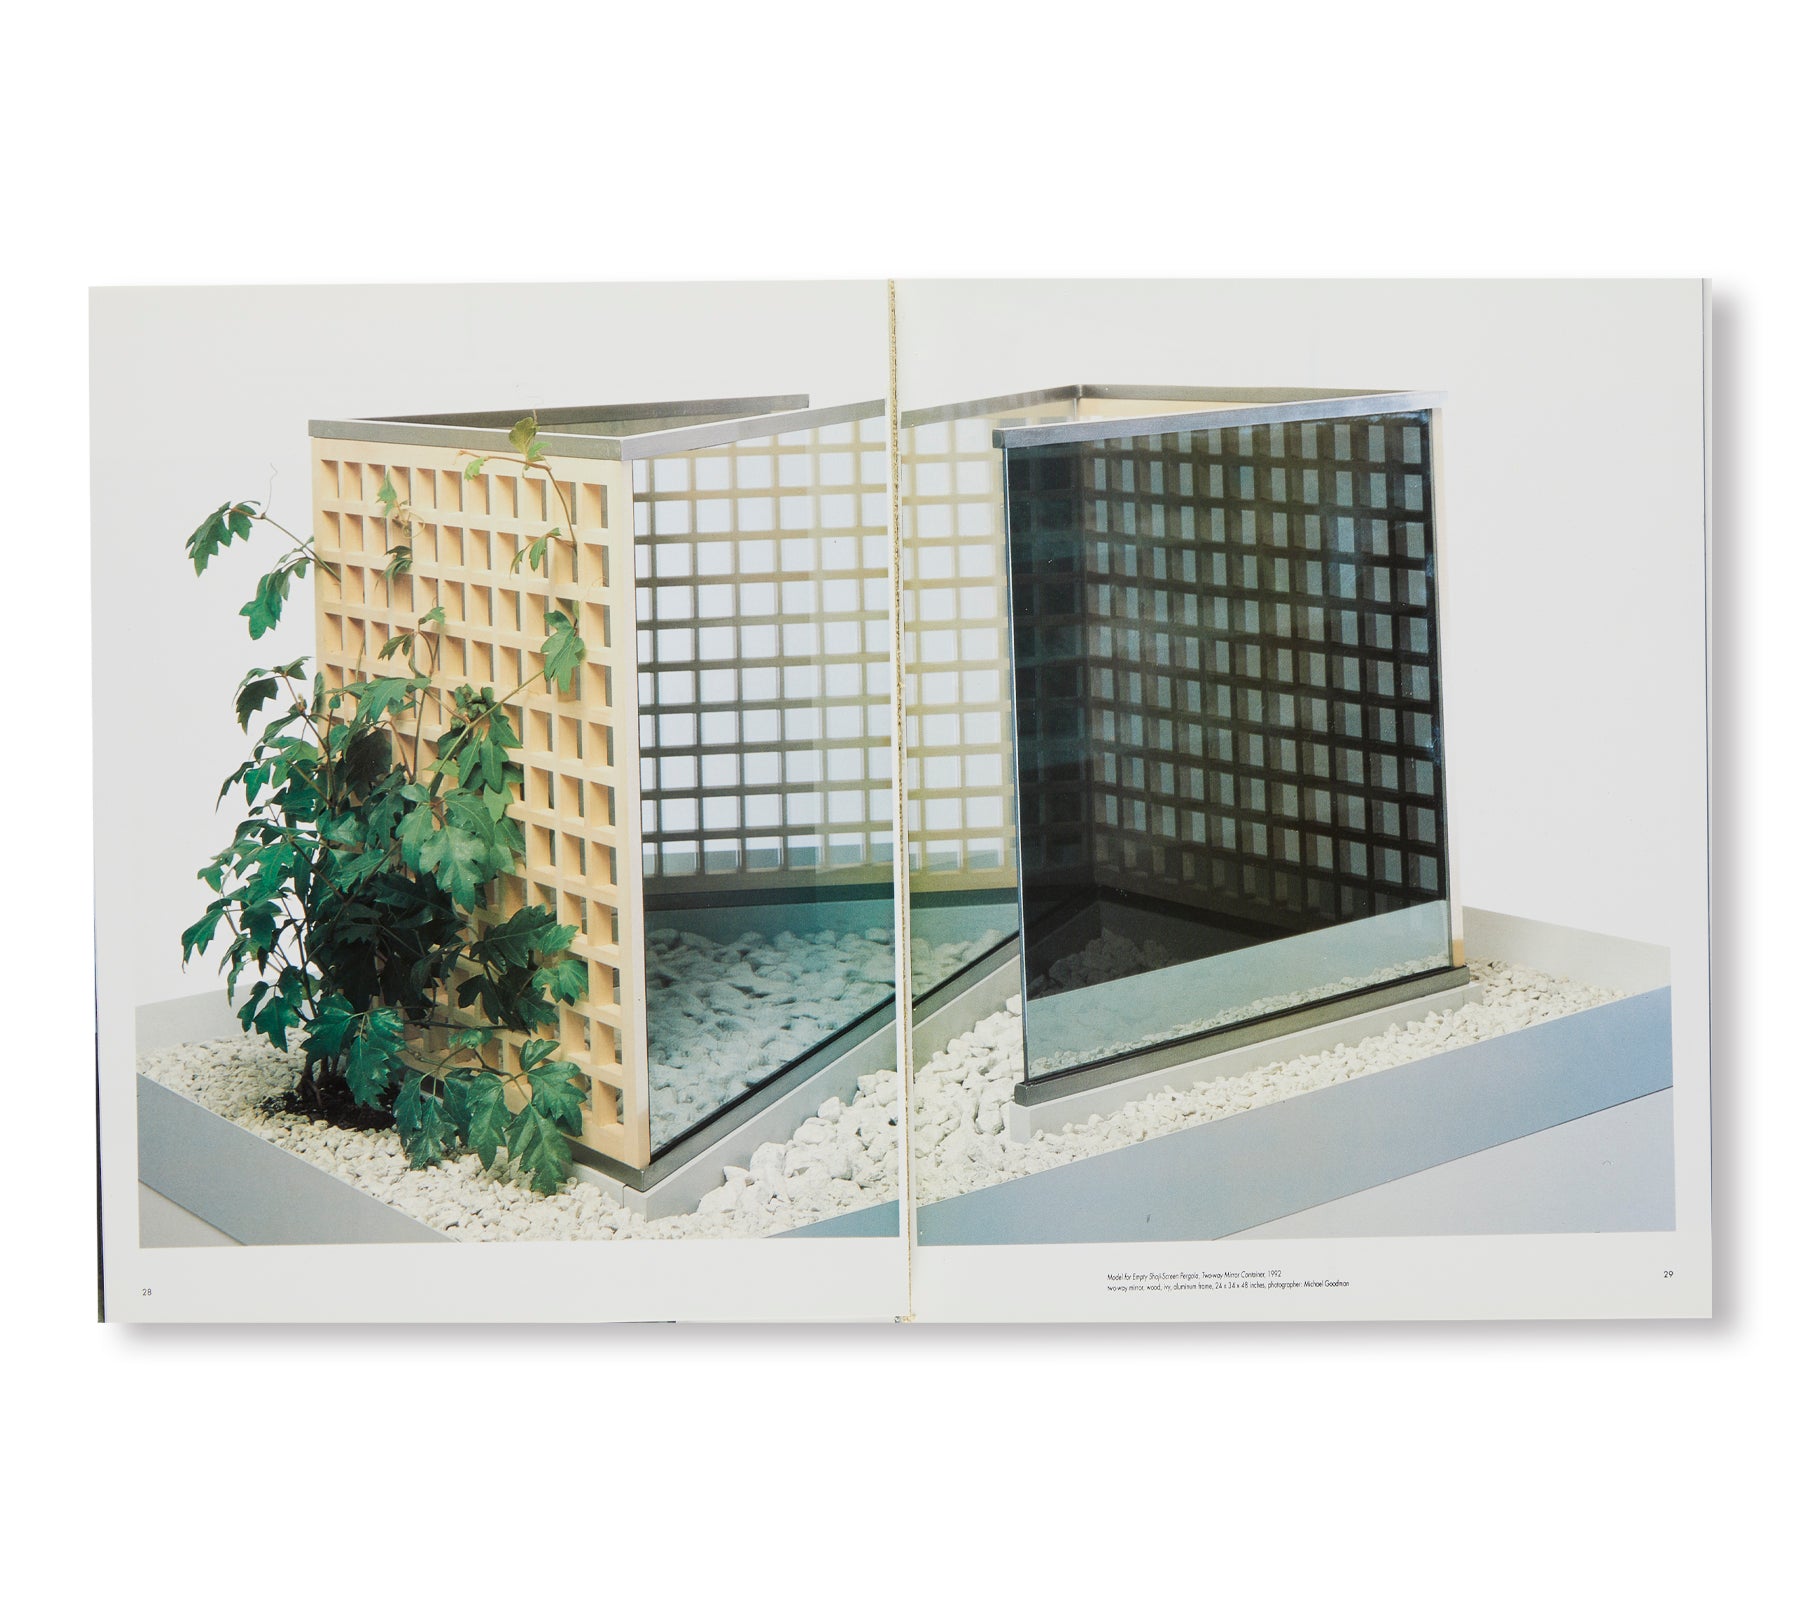 MODELS TO PROJECTS 1978 TO 1995 by Dan Graham